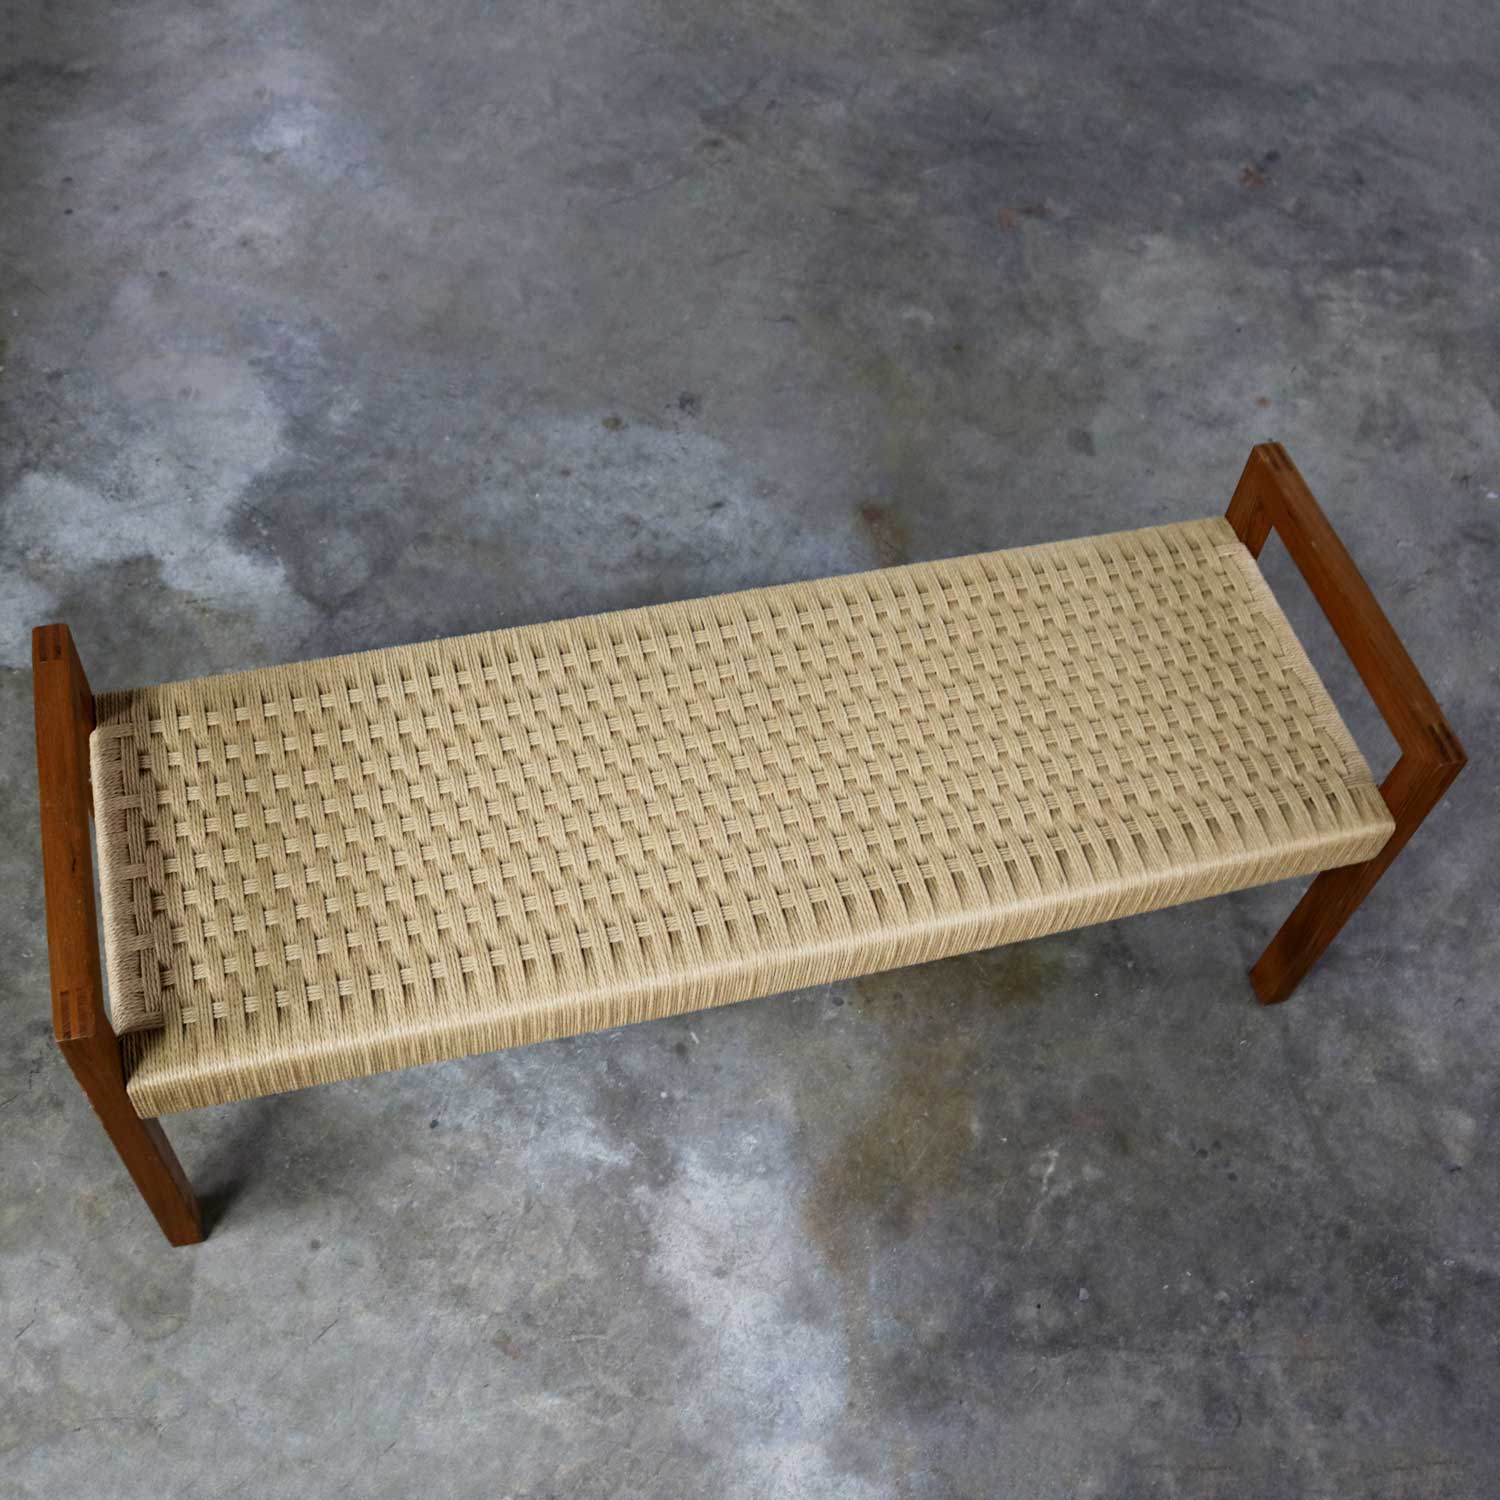 Scandinavian Modern Style Rope and Teak Bench by Sun Cabinet Company